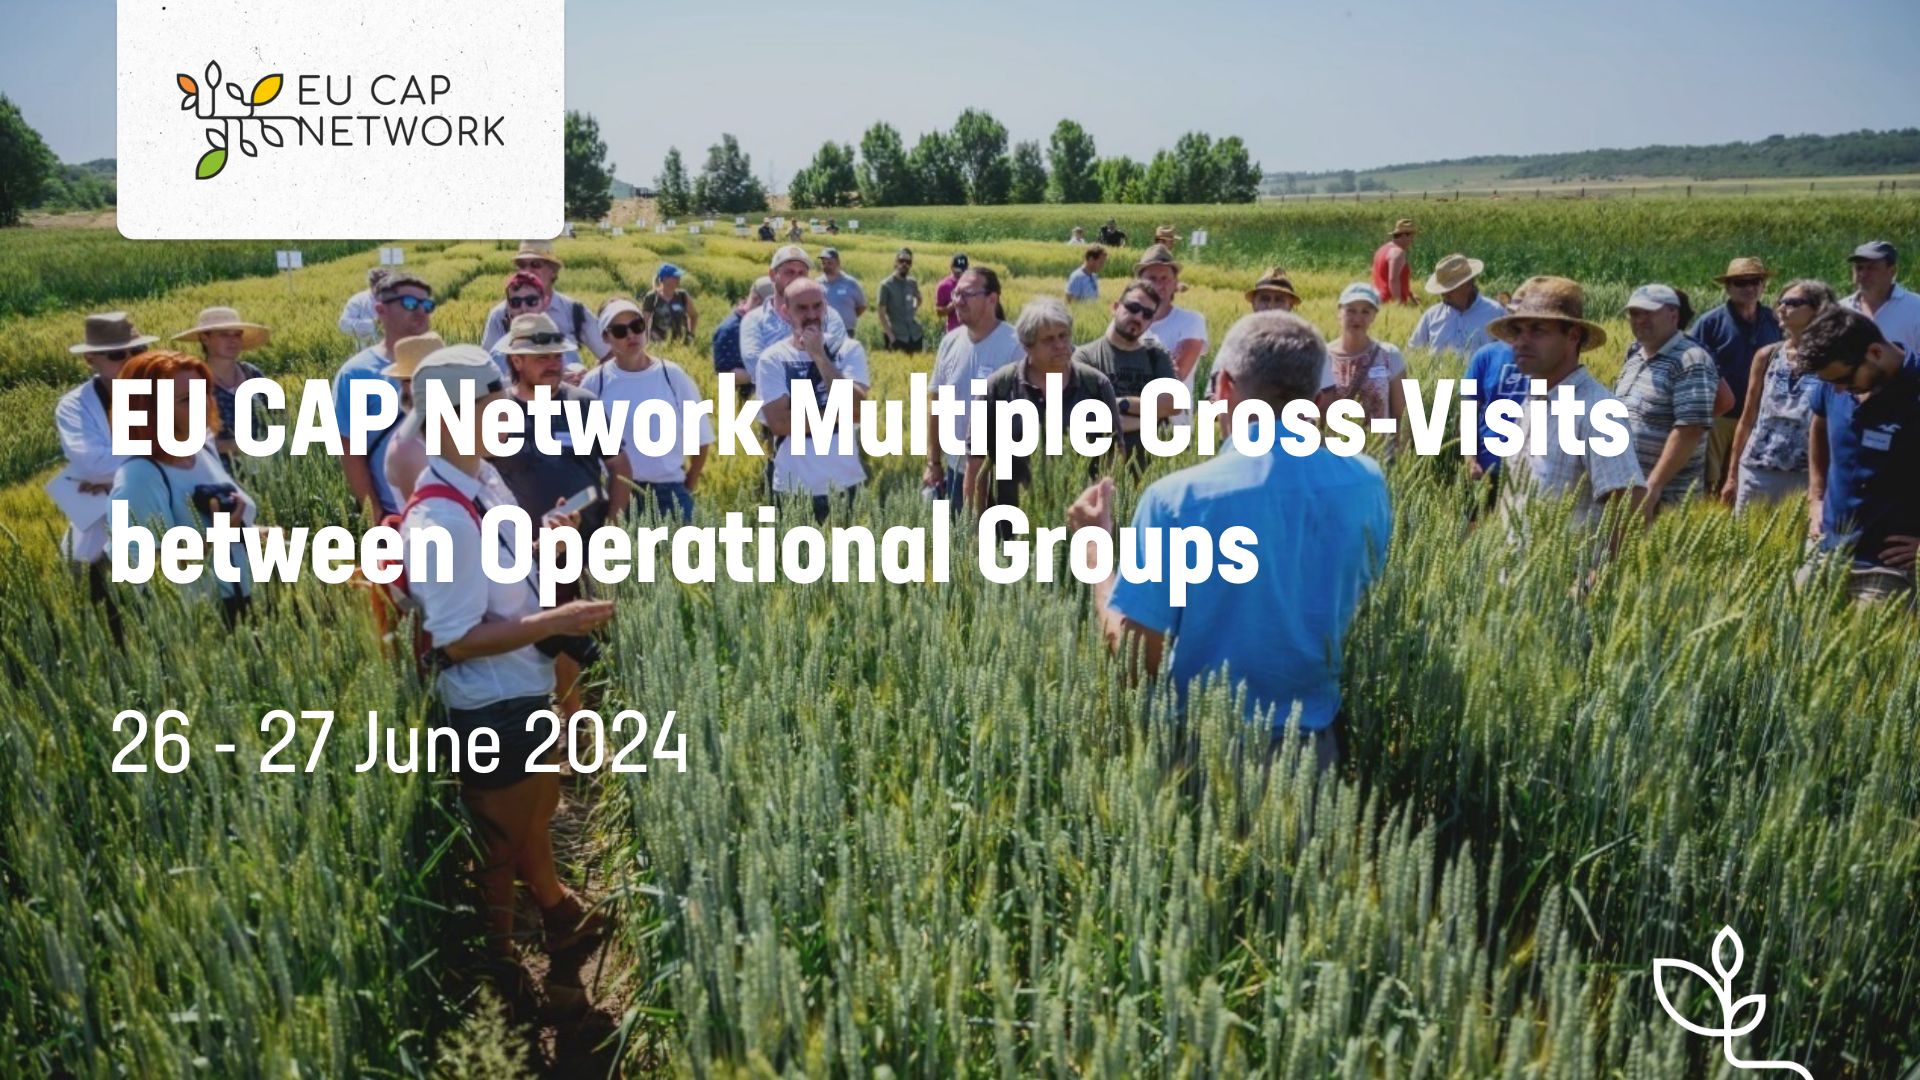 EU CAP Network Multiple cross-visits for Operational Groups. Request for expression of interest